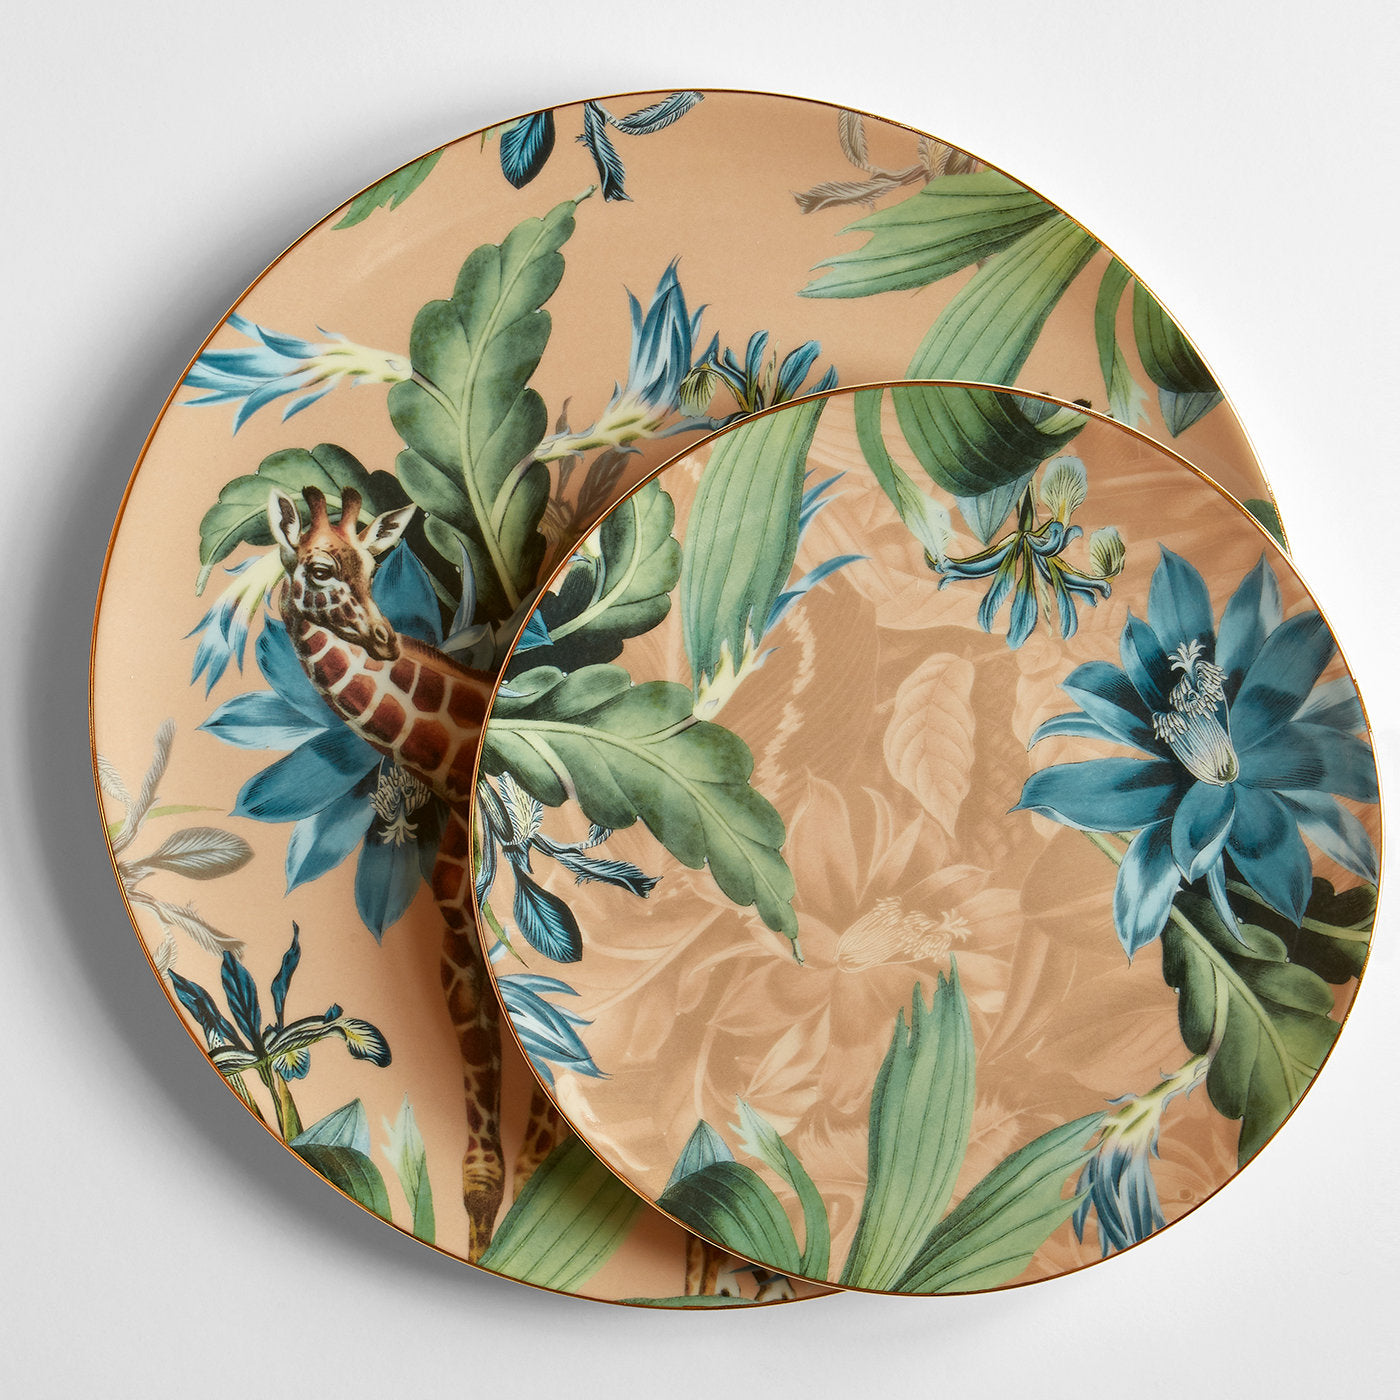 Animalia Porcelain Dinner Plate With Giraffes And Blue Flowers - Alternative view 1